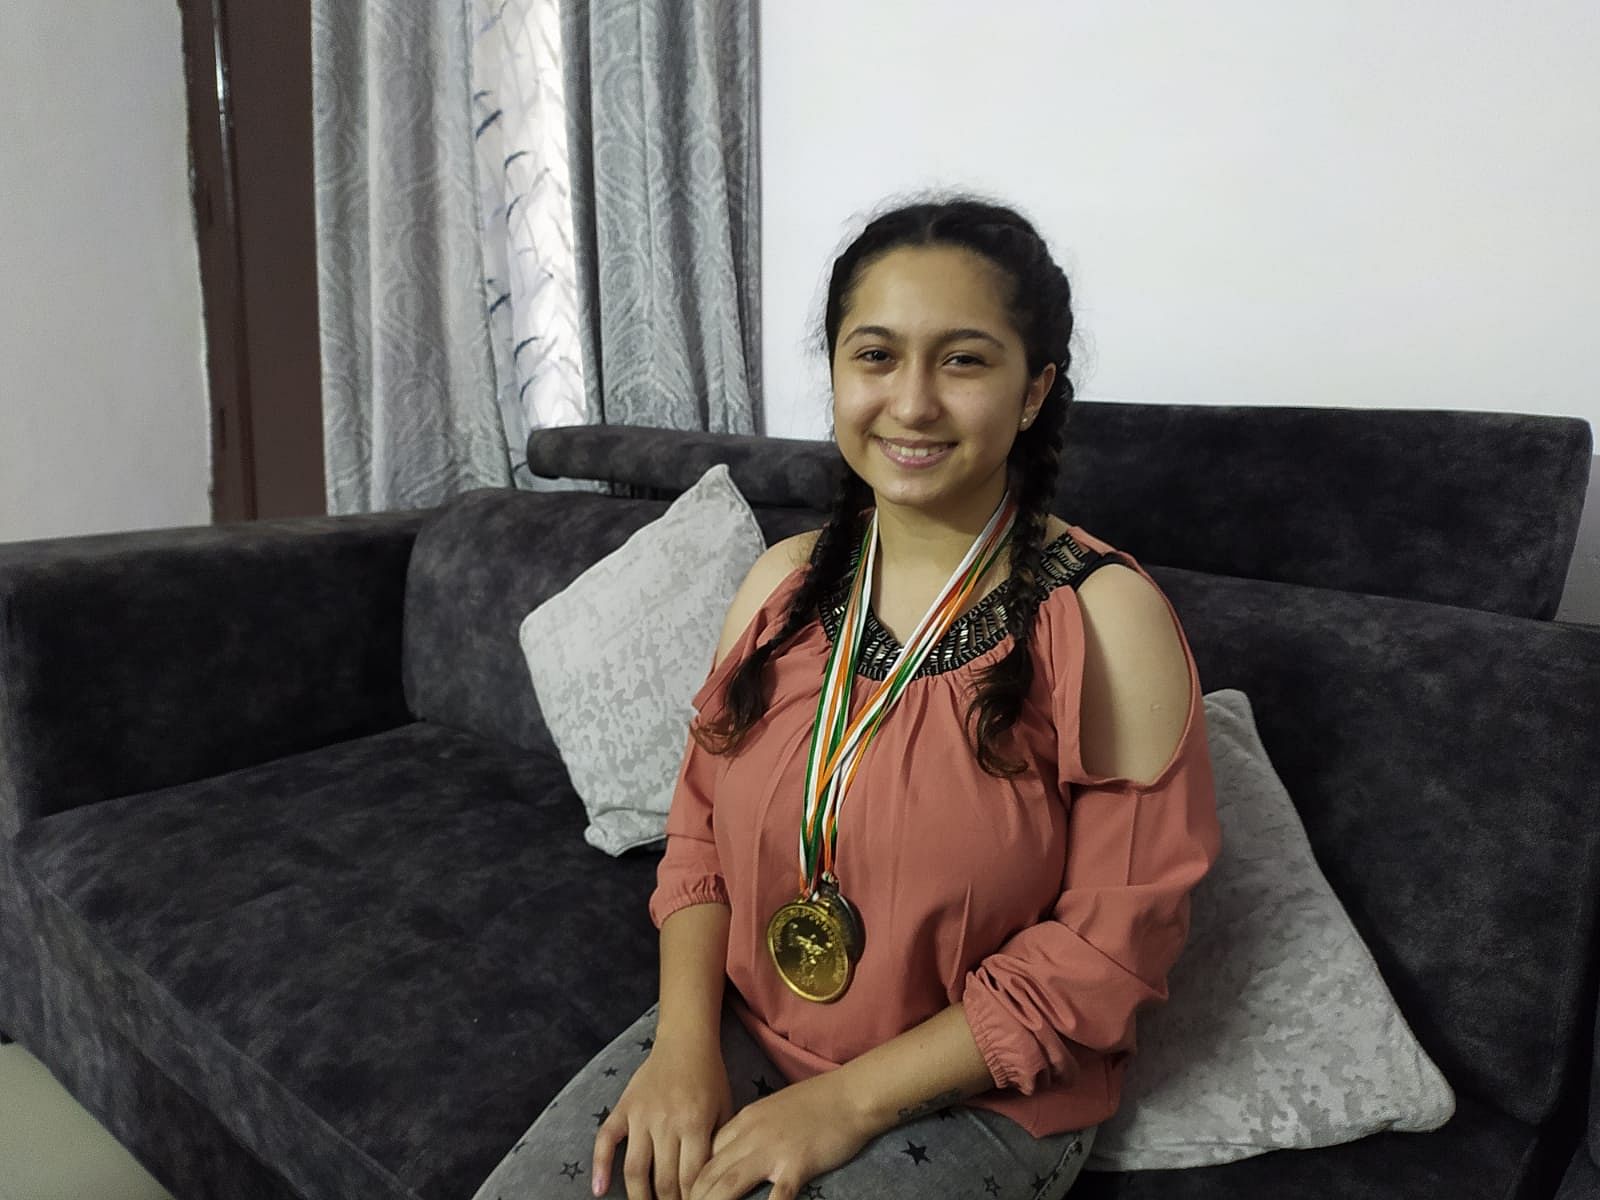 Sajar with her medals in local competitions. | Photo: ThePrint